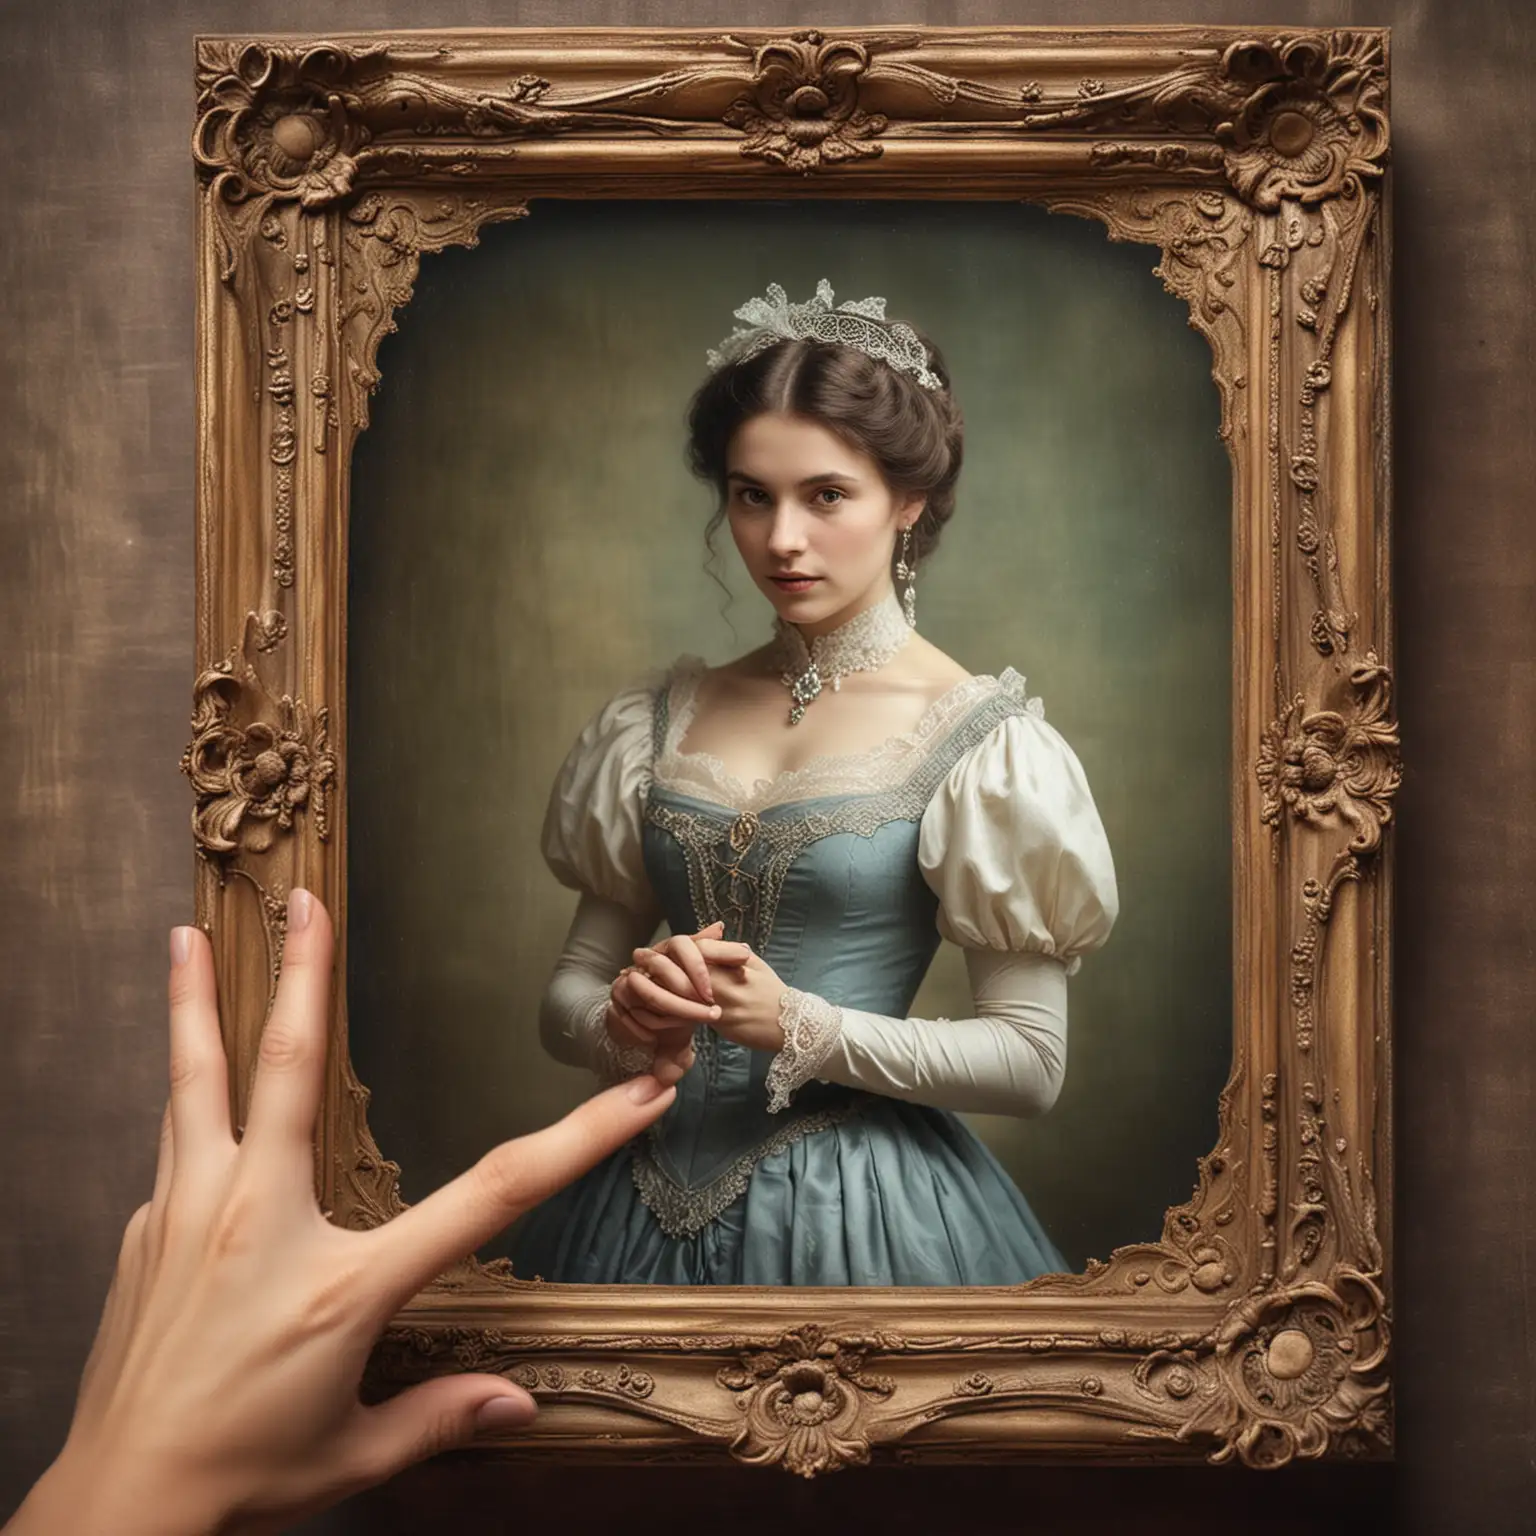 The beautiful and magical photo shows hands delicately holding an old color photograph of a beautiful woman in Victorian era clothing.  The background of the photo is neutral to focus attention on the photo itself, which is like a portal taking us to the magical past.  The scene has a magical atmosphere, with subtle elements that add depth and mystery, making the moment come alive and the magic of the past felt.  There are no additional people in the frame, which allows you to fully concentrate on photography and capturing the moment.